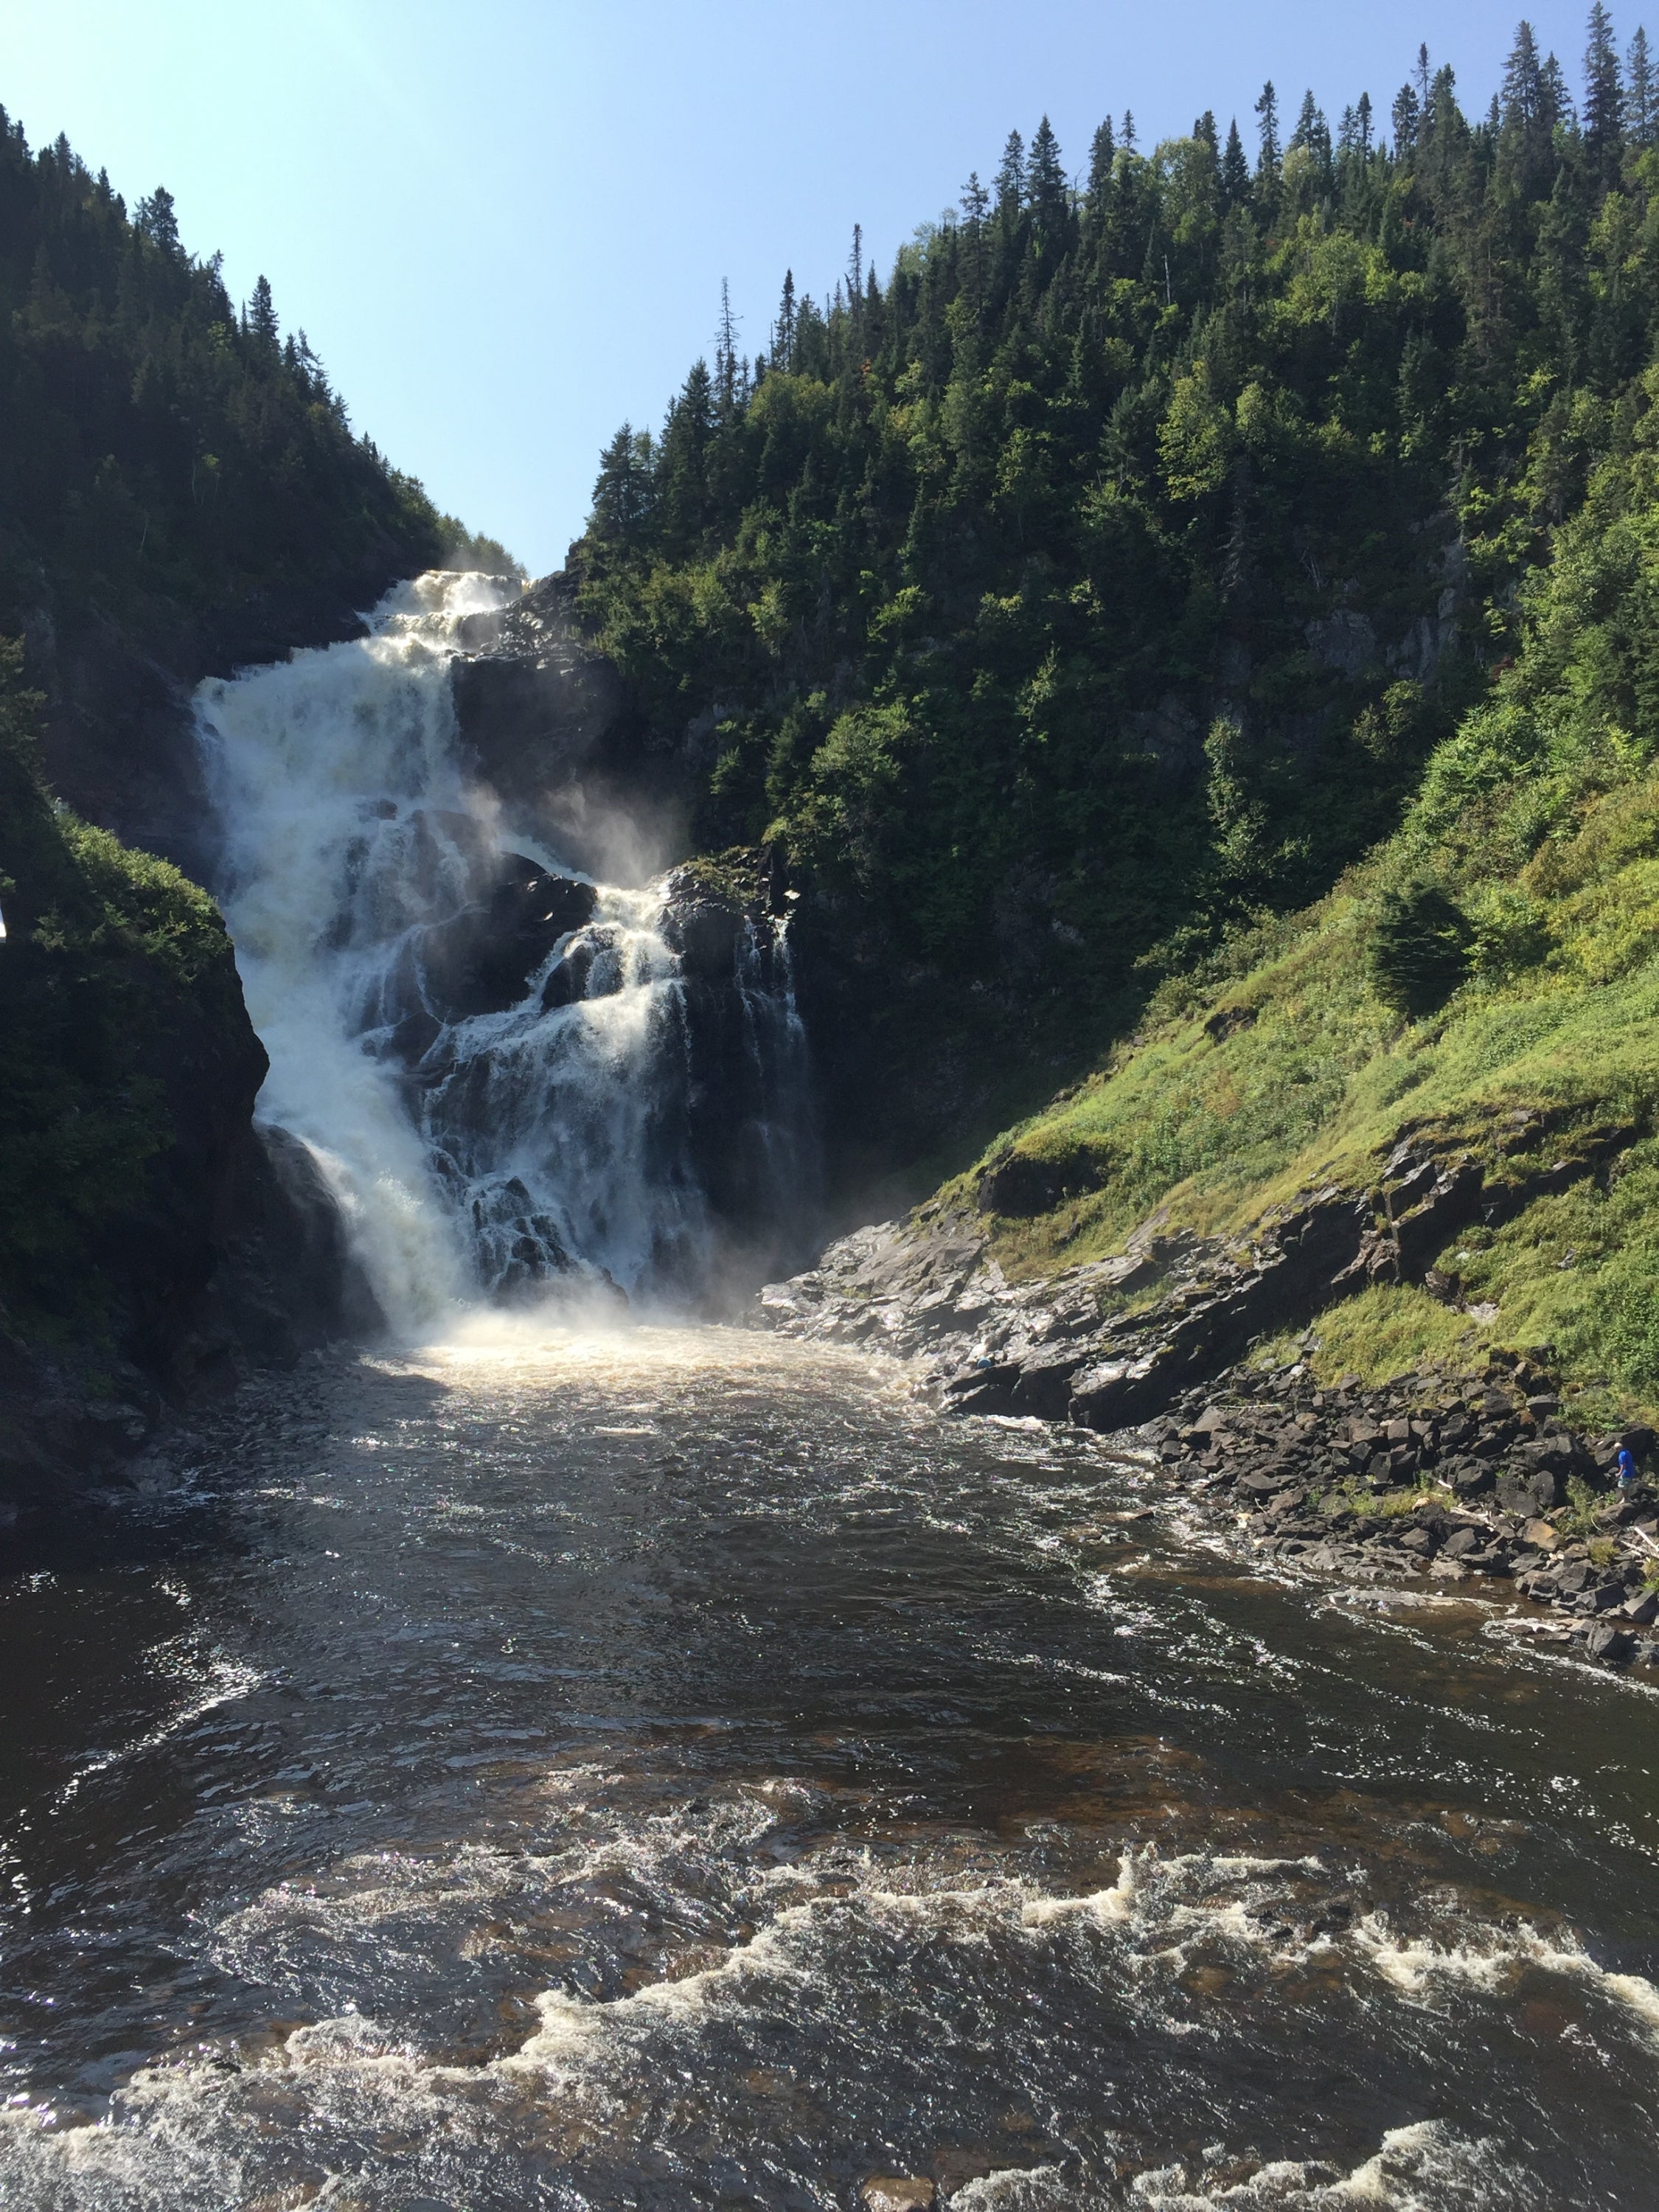 Waterfalls in the Saguenay region of Quebec.